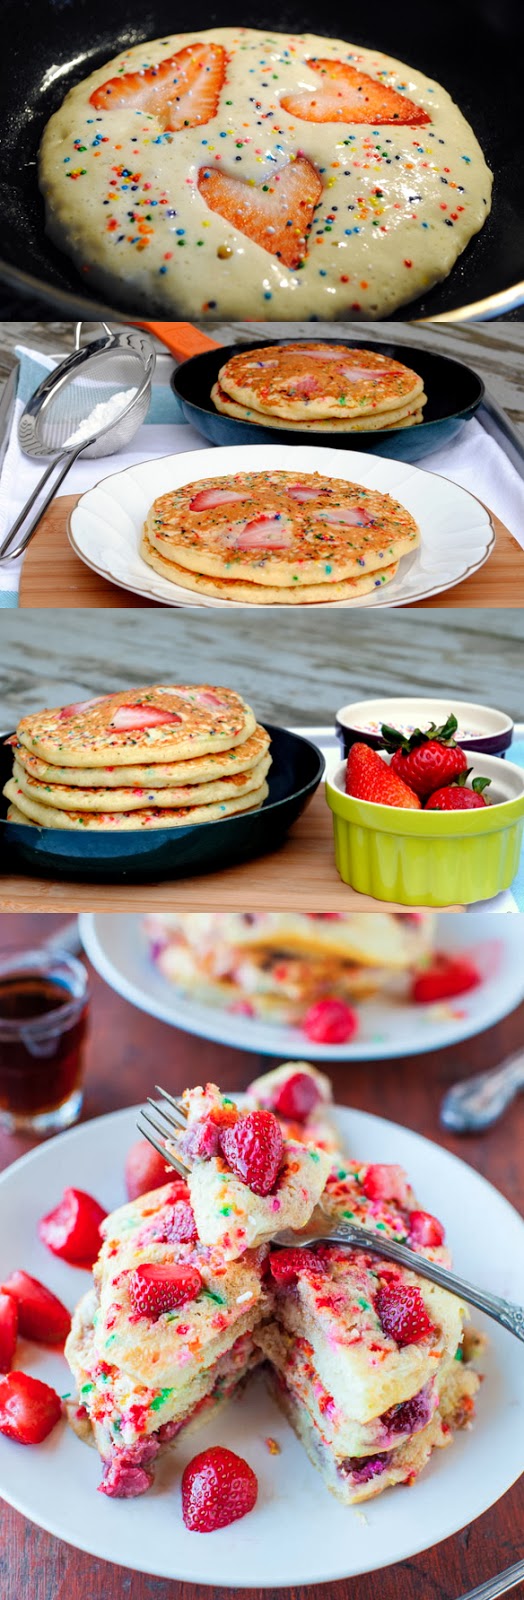 how  Funfetti Strawberry with pancakes Sprinkle strawberry Pancakes mix to make